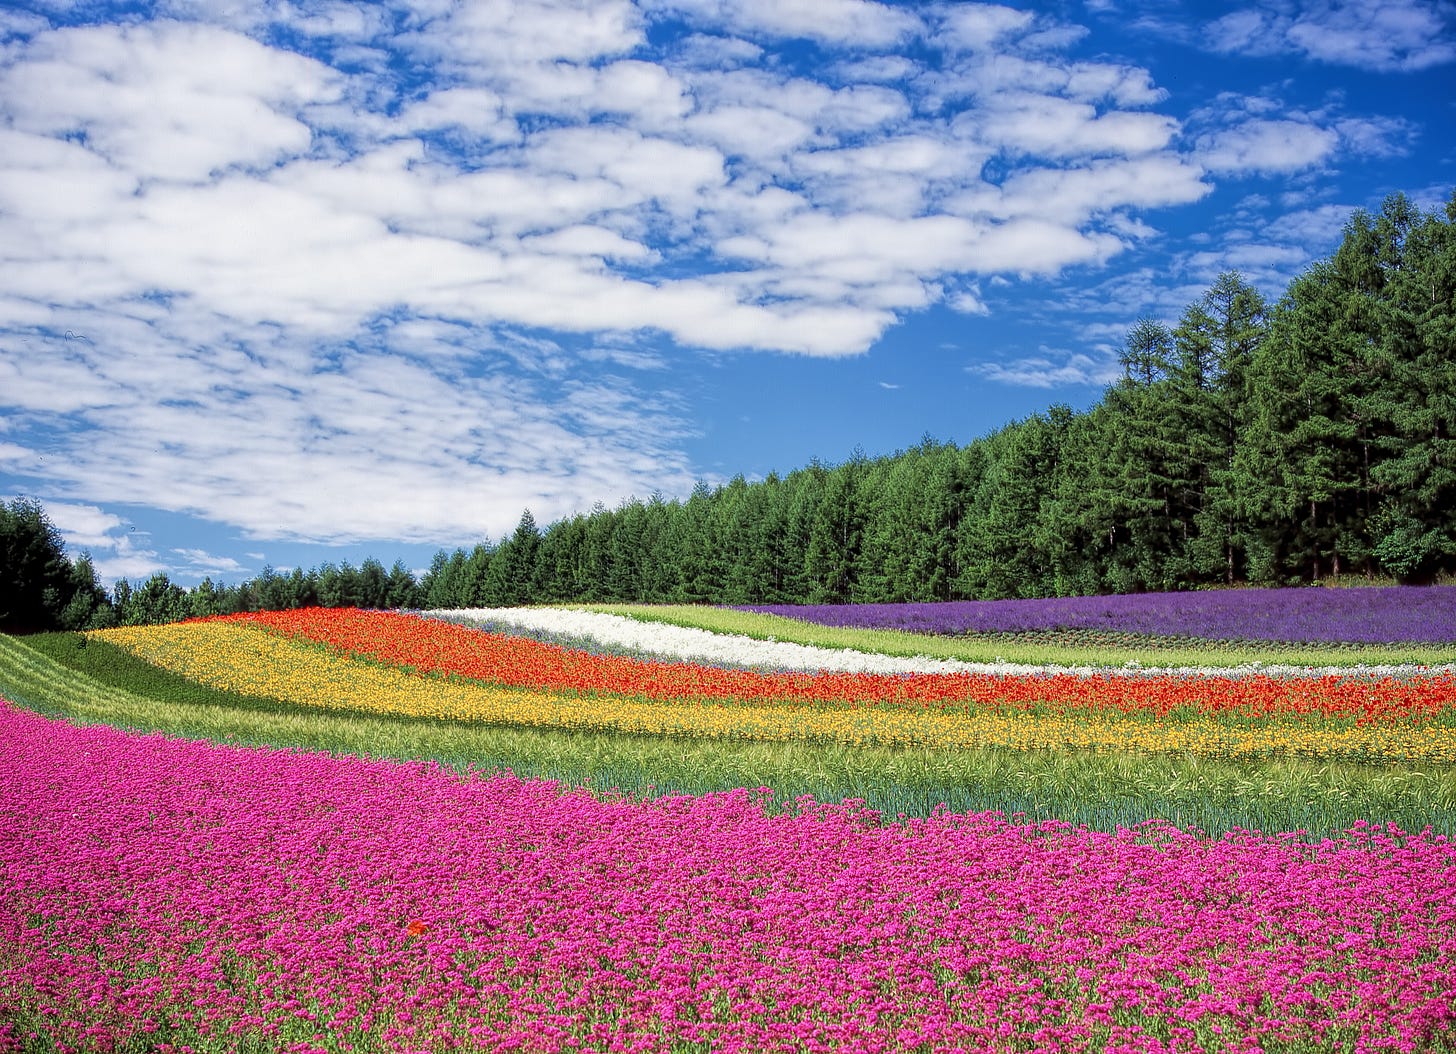 A field full of pink, yellow, red, white, and purple flowers.